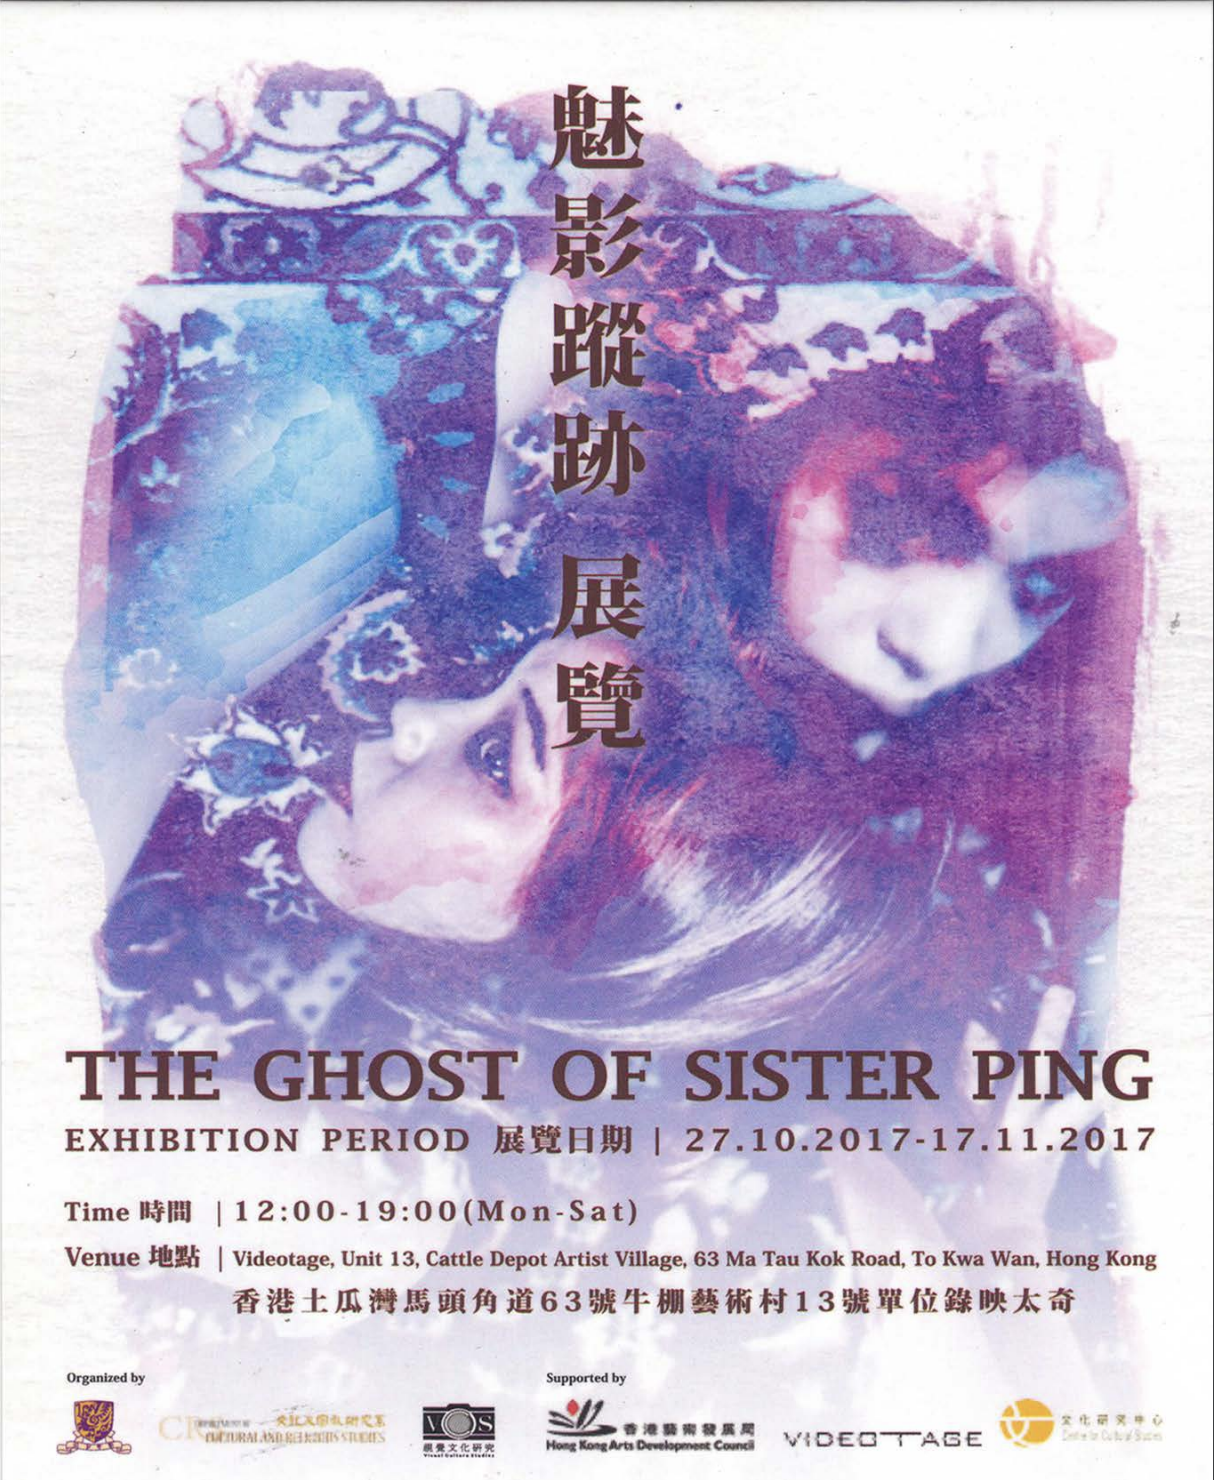 The Ghost of Sister Ping – Postcard 魅影蹤跡 – 明信片